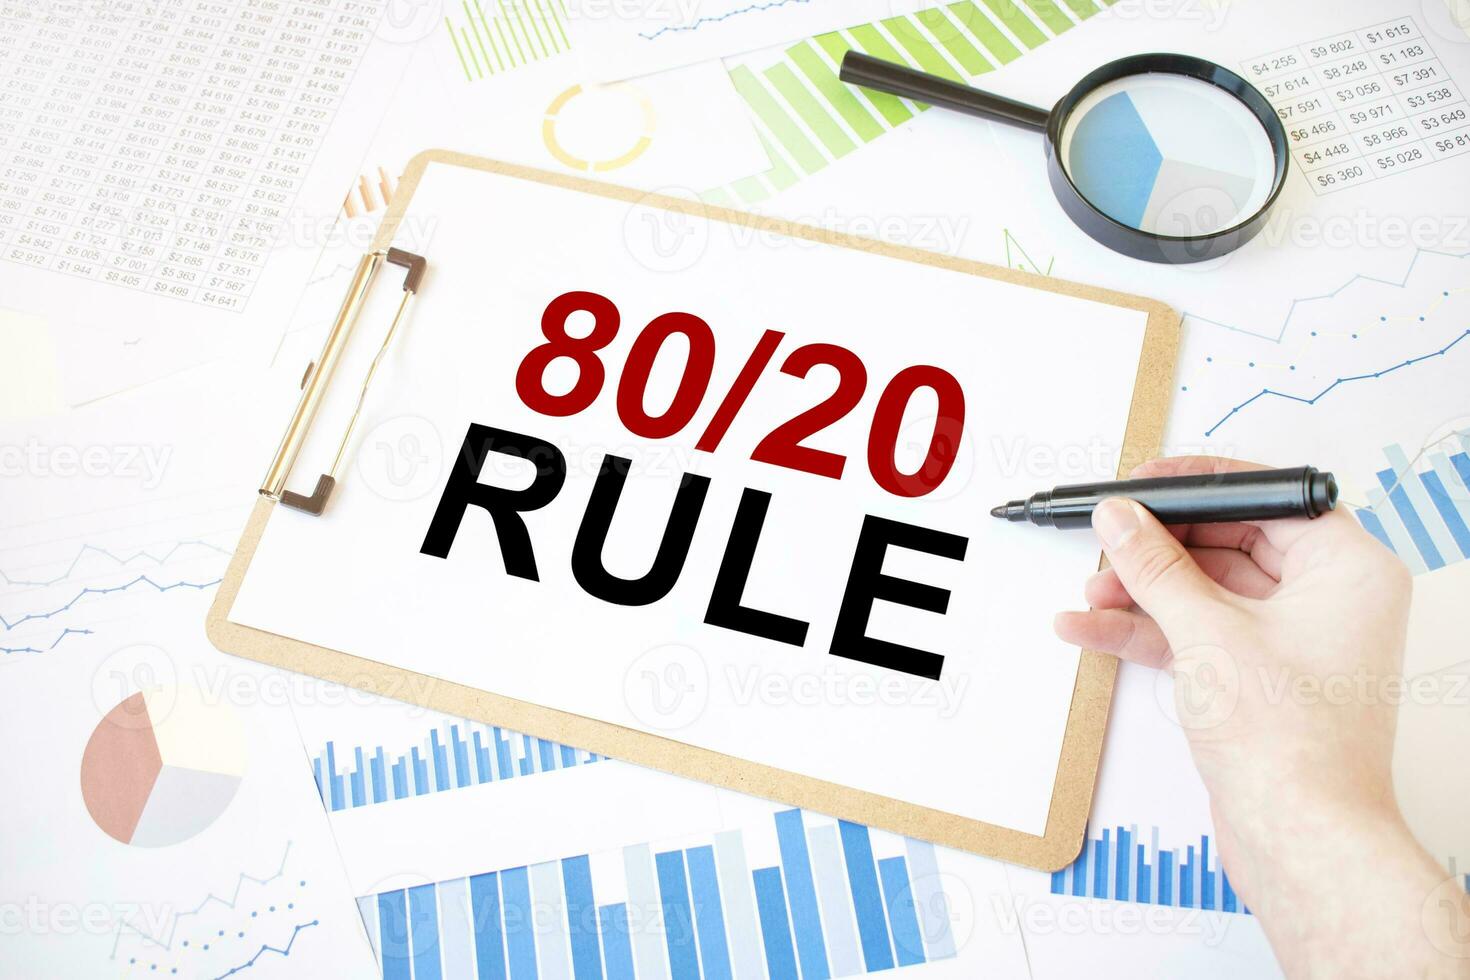 Text 80 and 20 rule on white paper sheet and marker on businessman hand on the diagram. Business concept photo